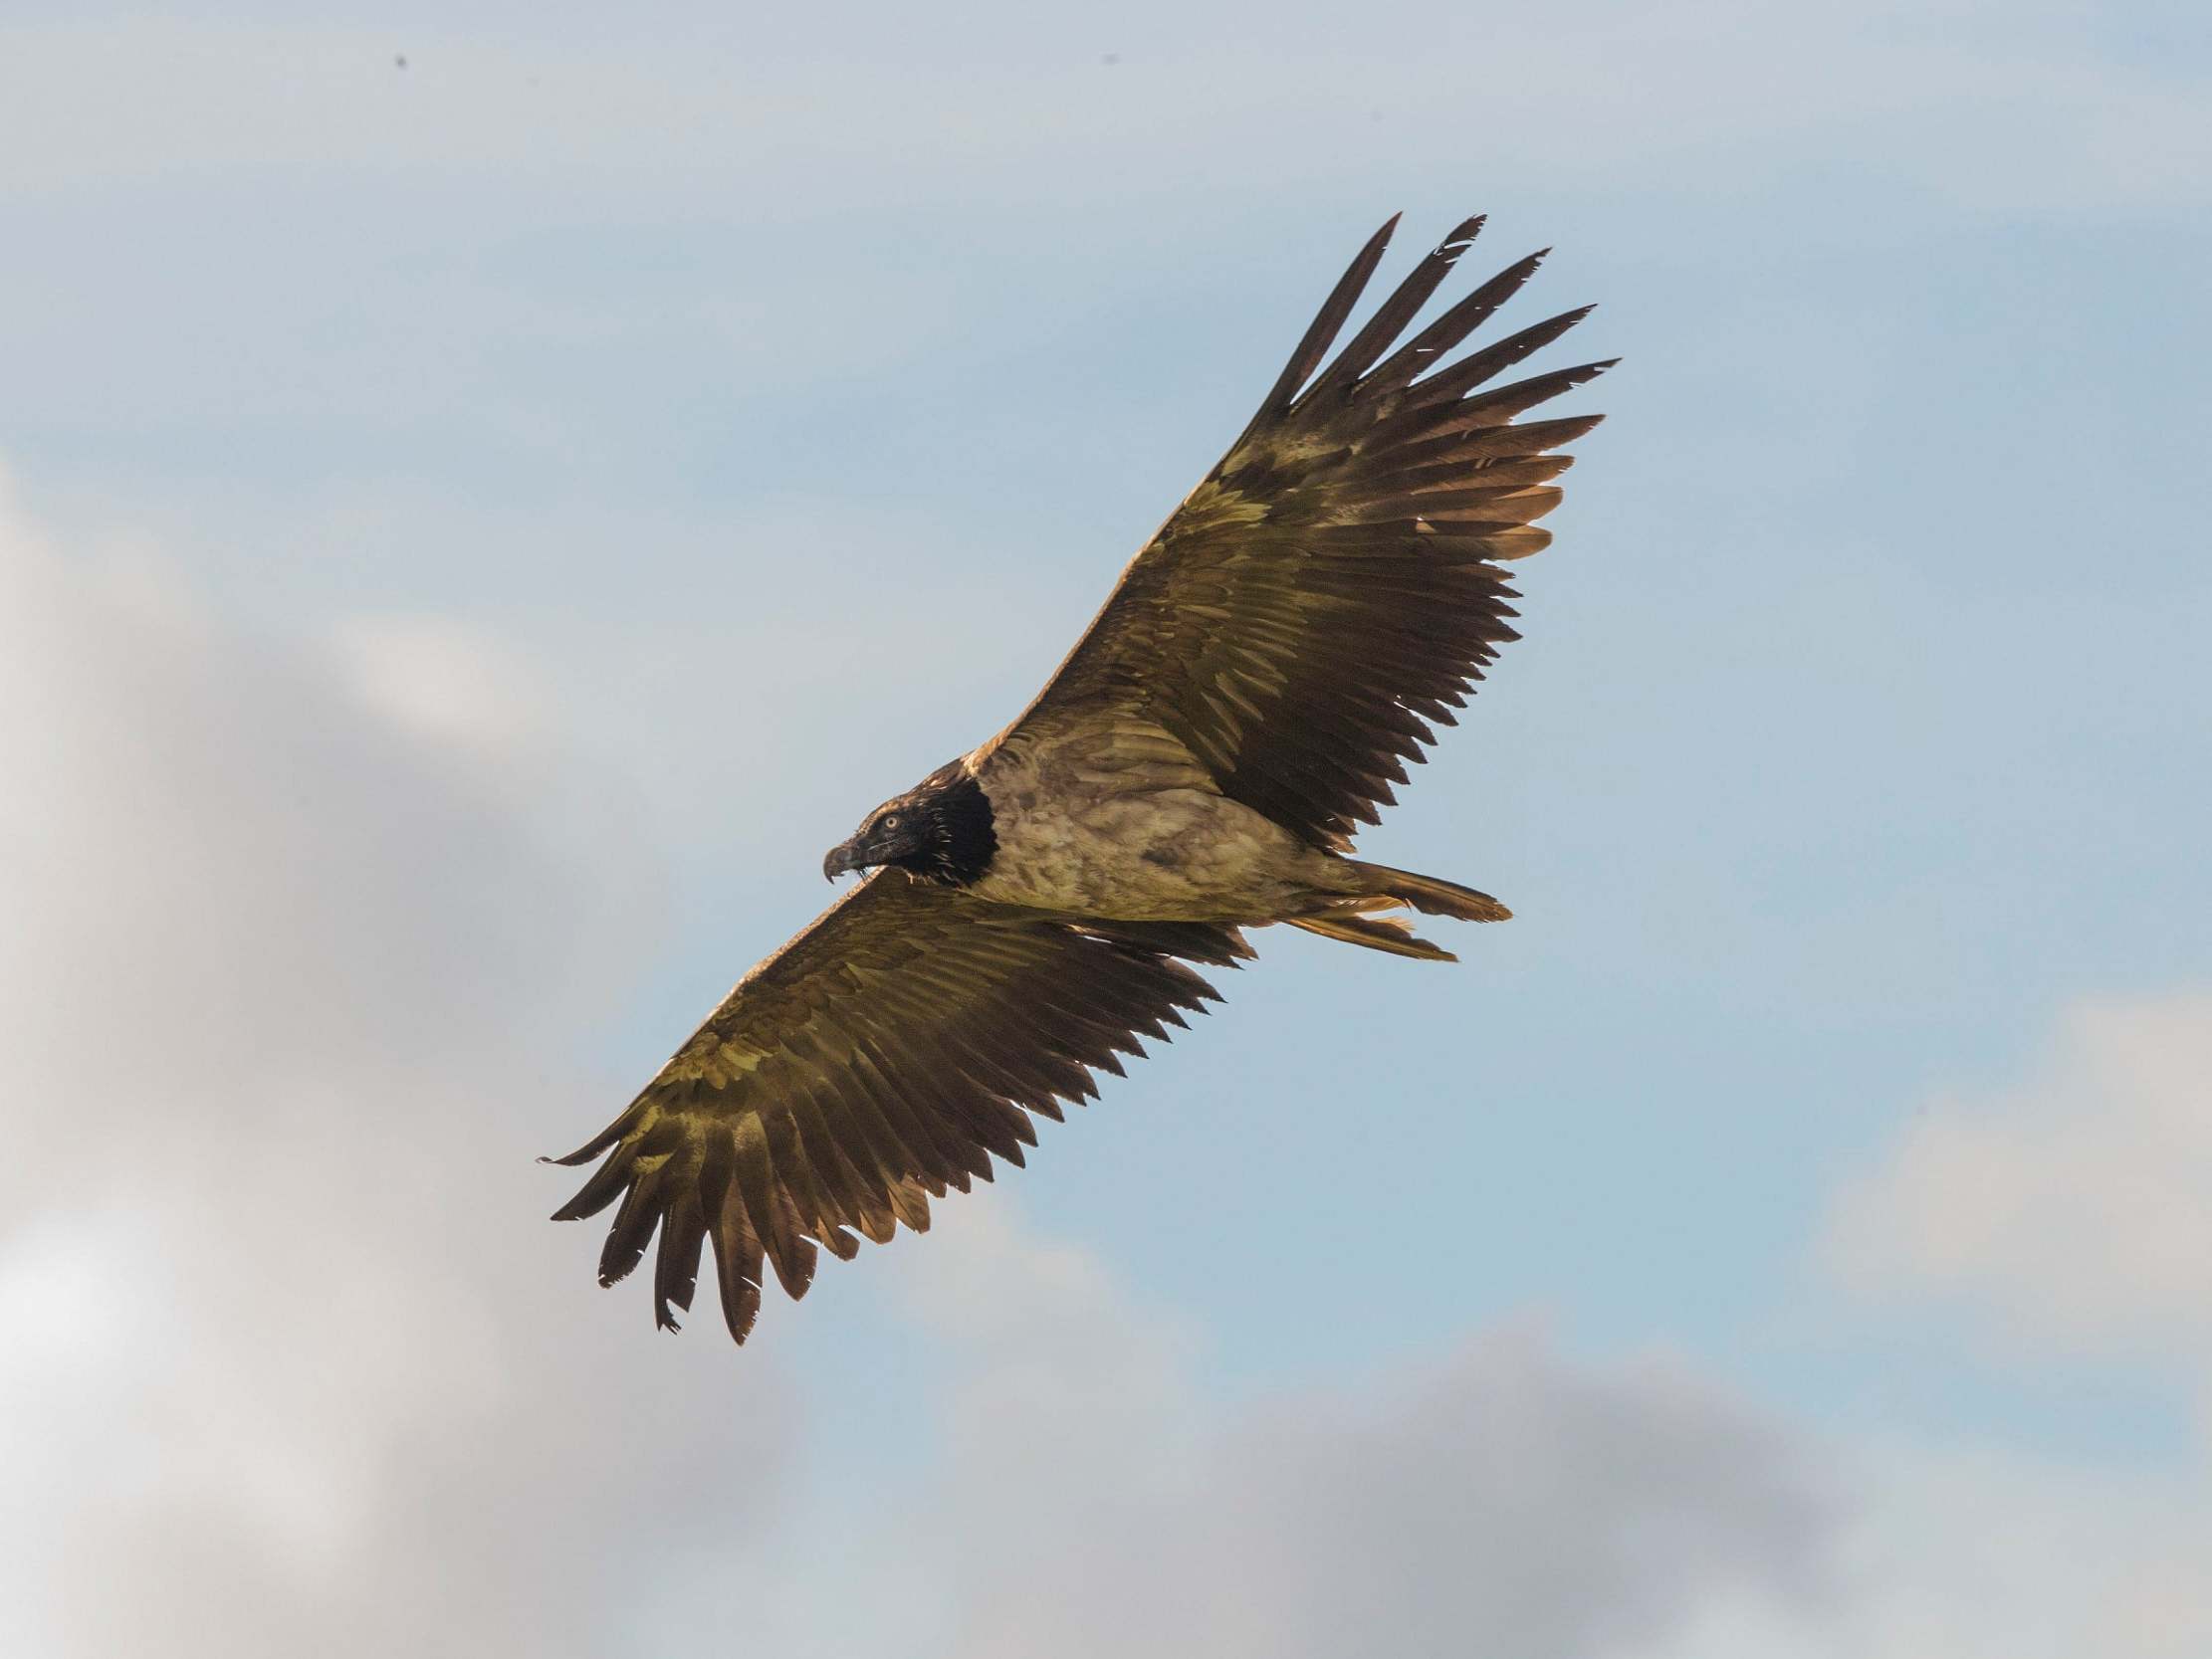 The bearded vulture, which has a wingspan of up to three metres, has only been seen in the UK once before